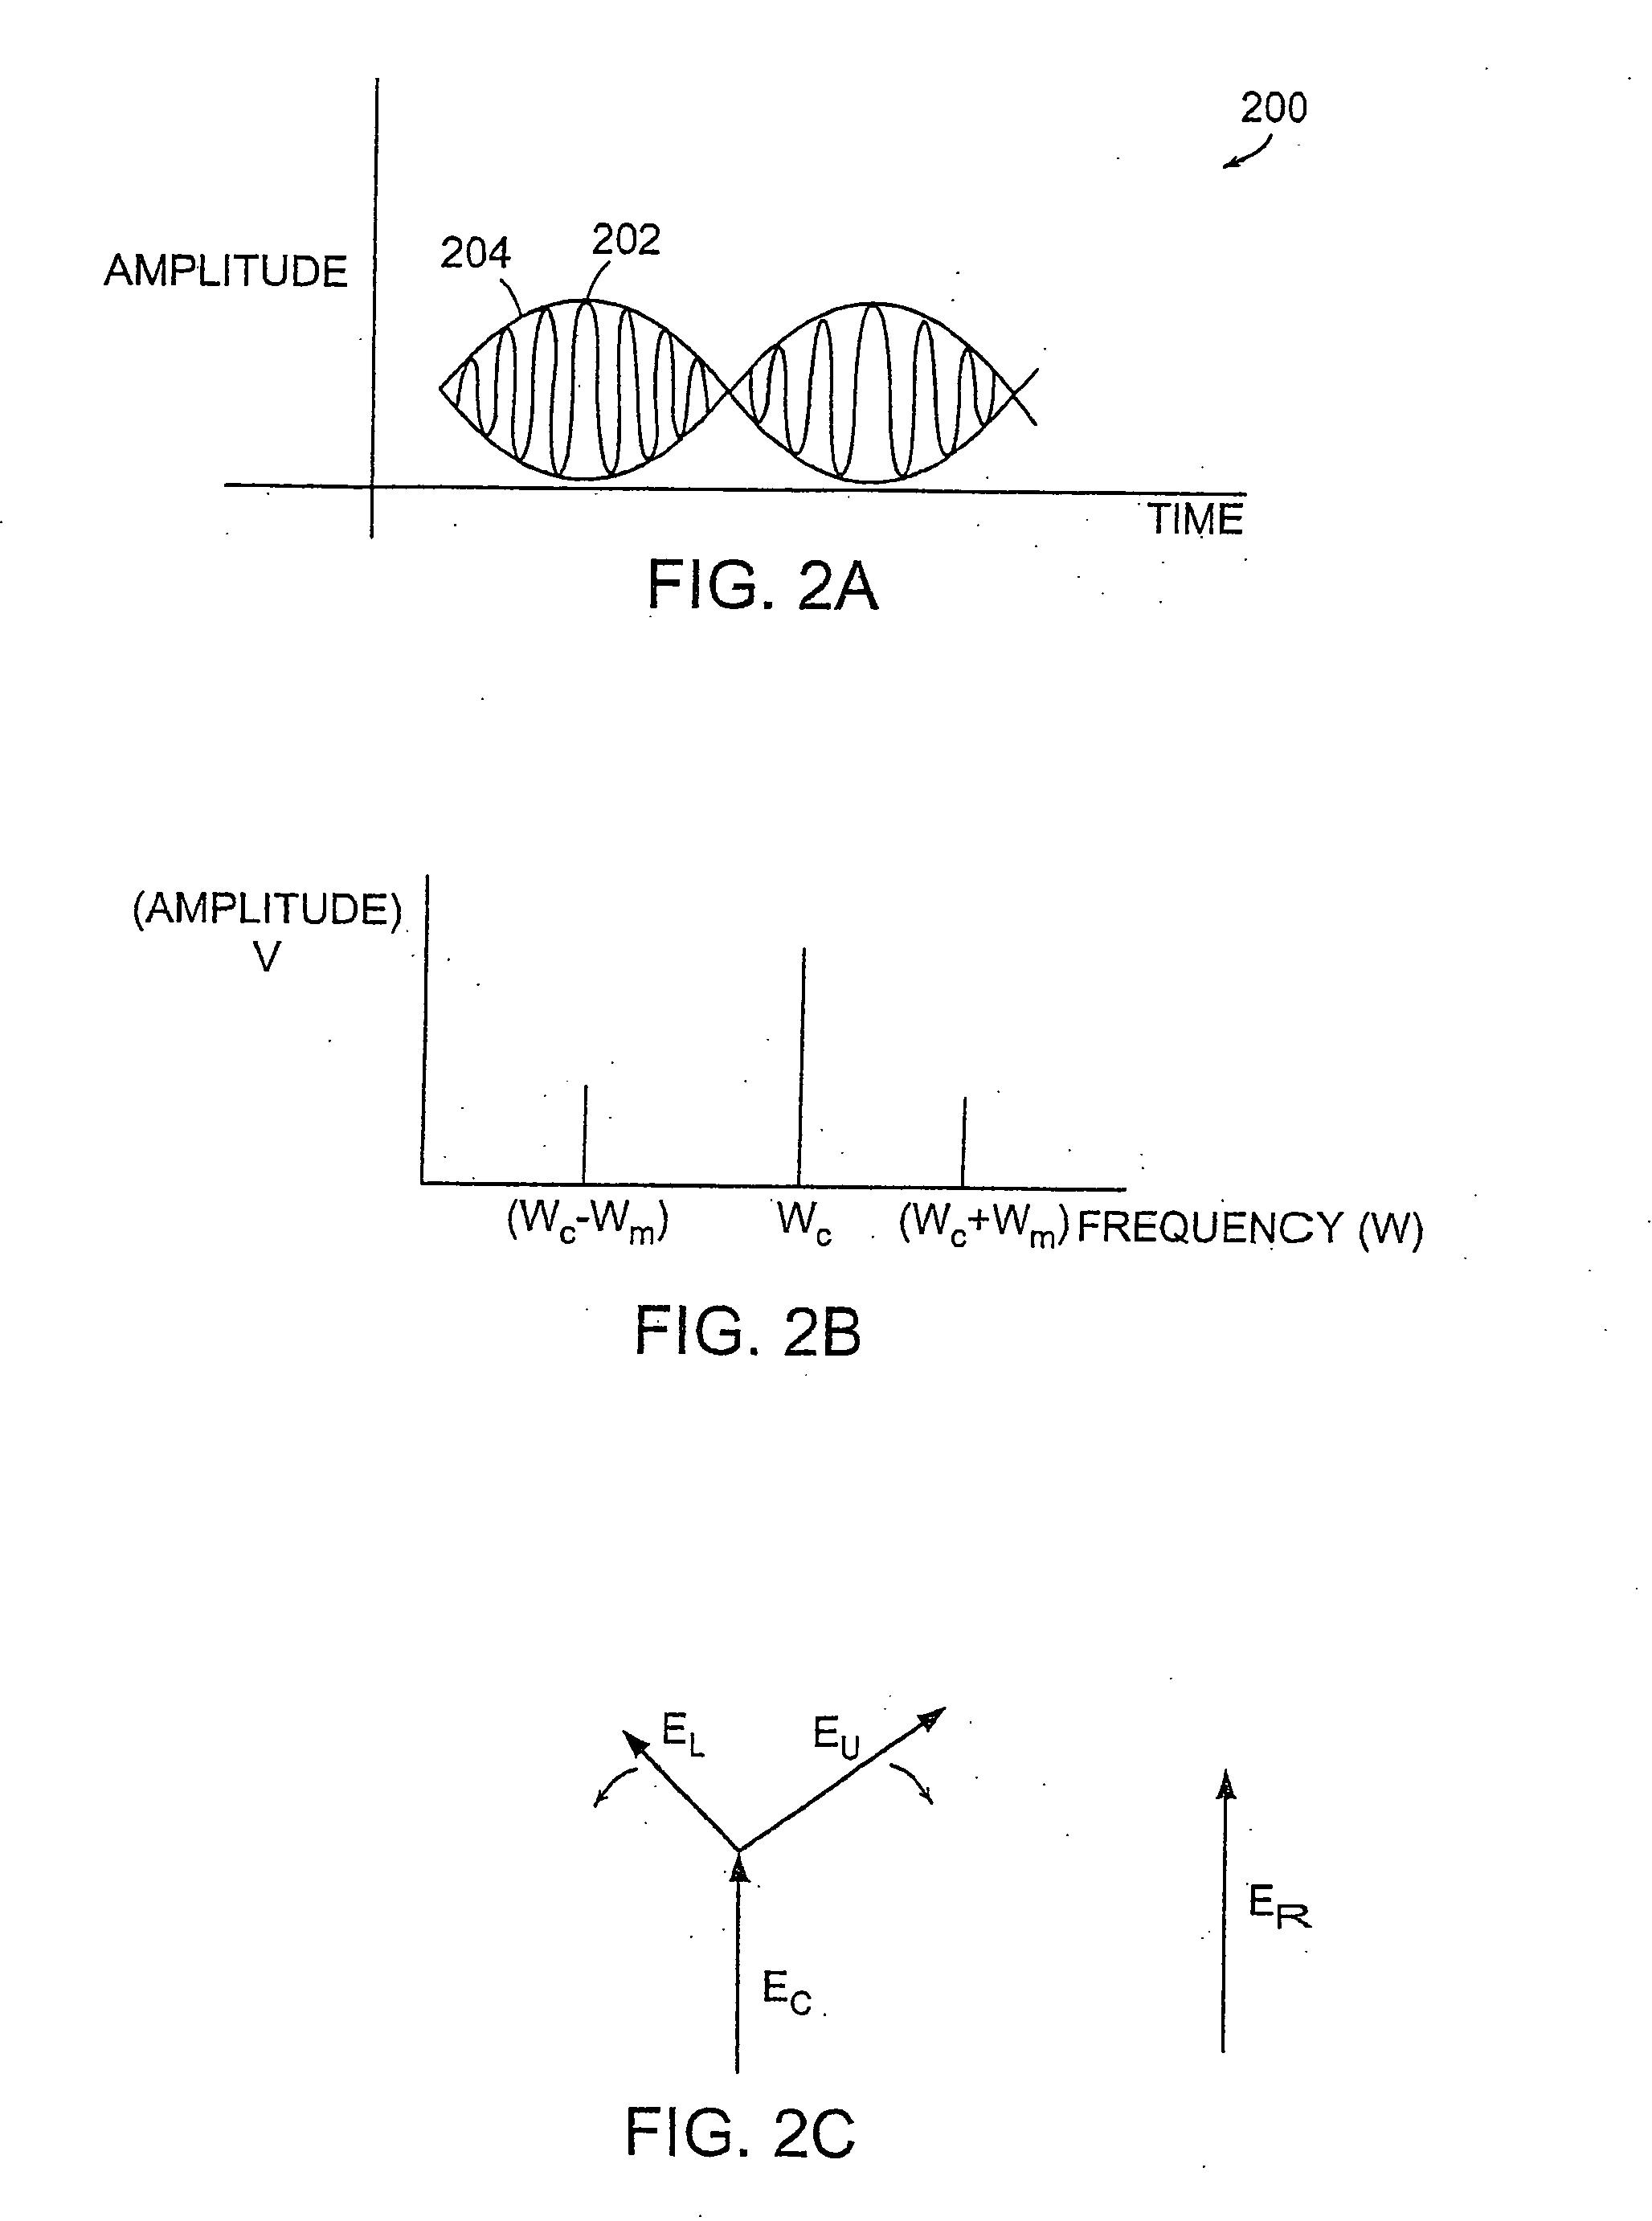 Adaptive correction of a received signal frequency response tilt